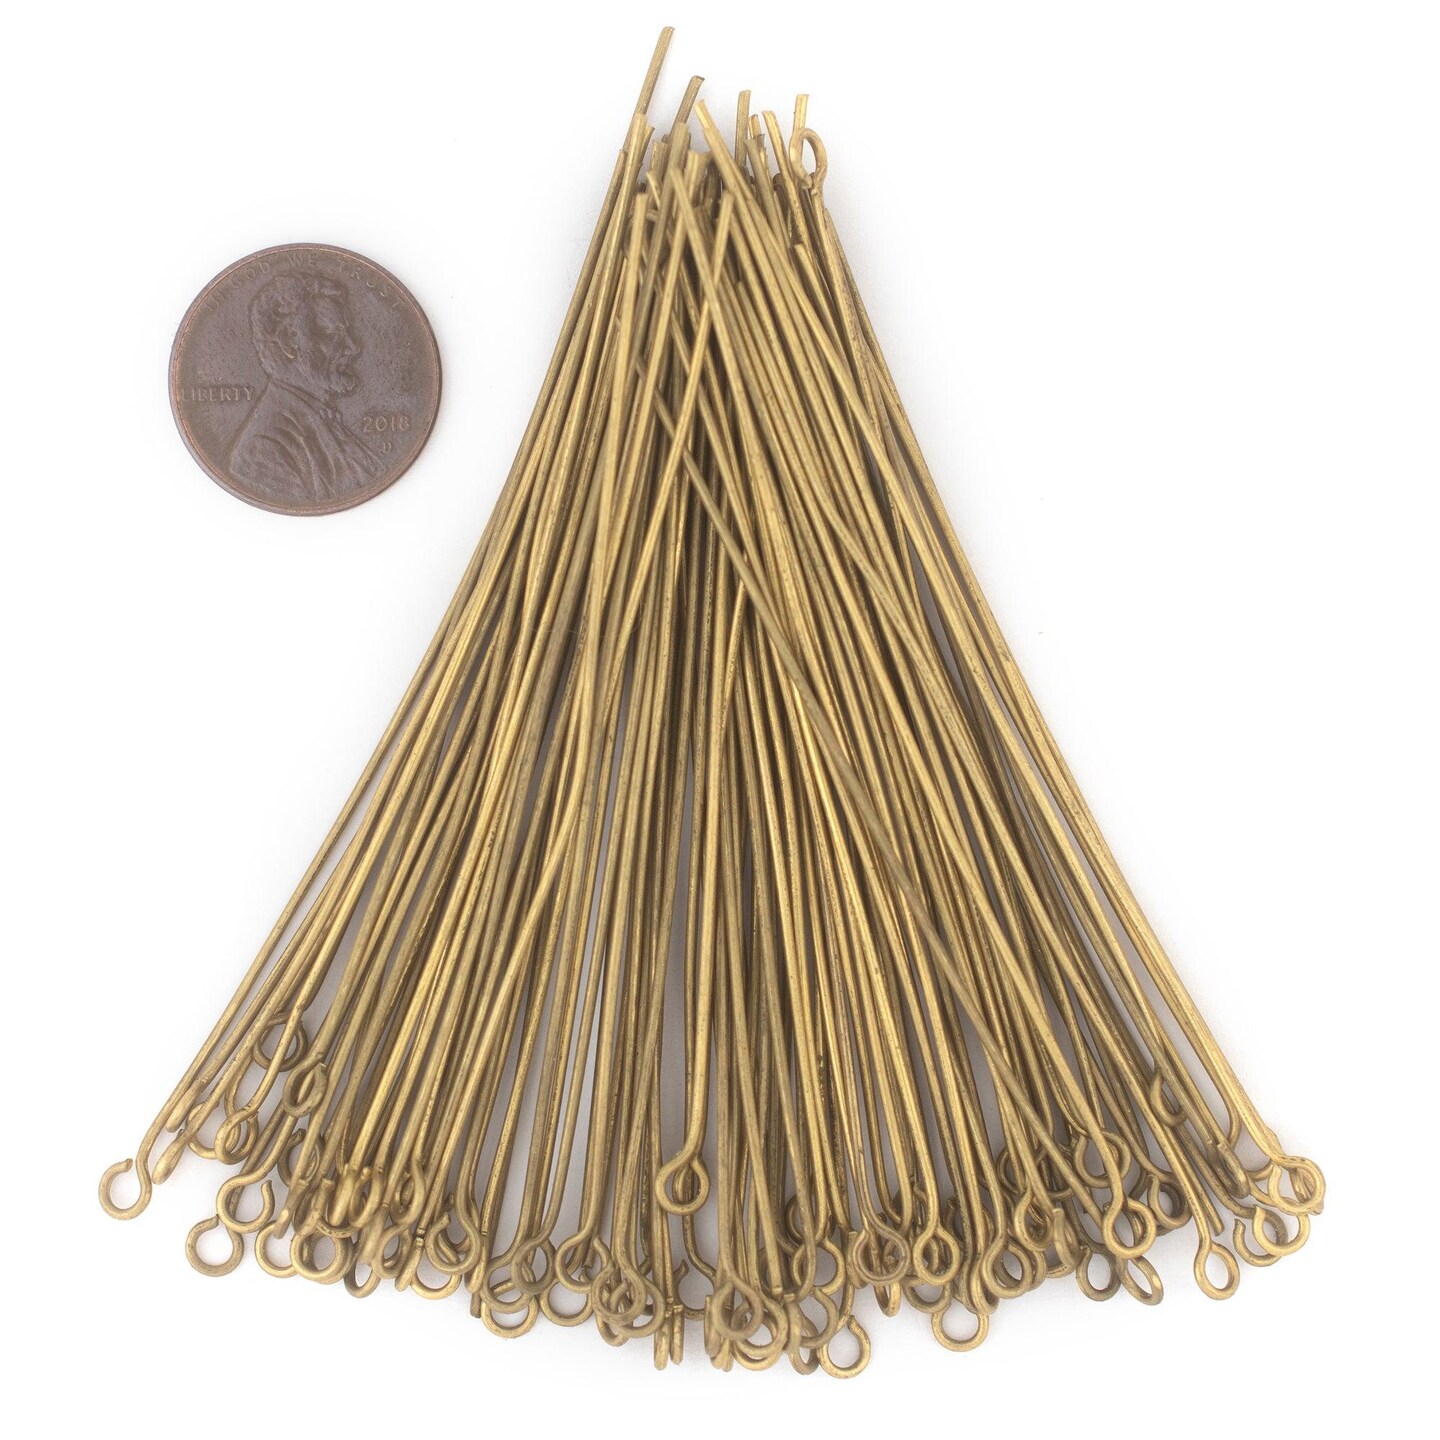 TheBeadChest Brass 21 Gauge 3 Inch Eye Pins (Approx 100 pieces)